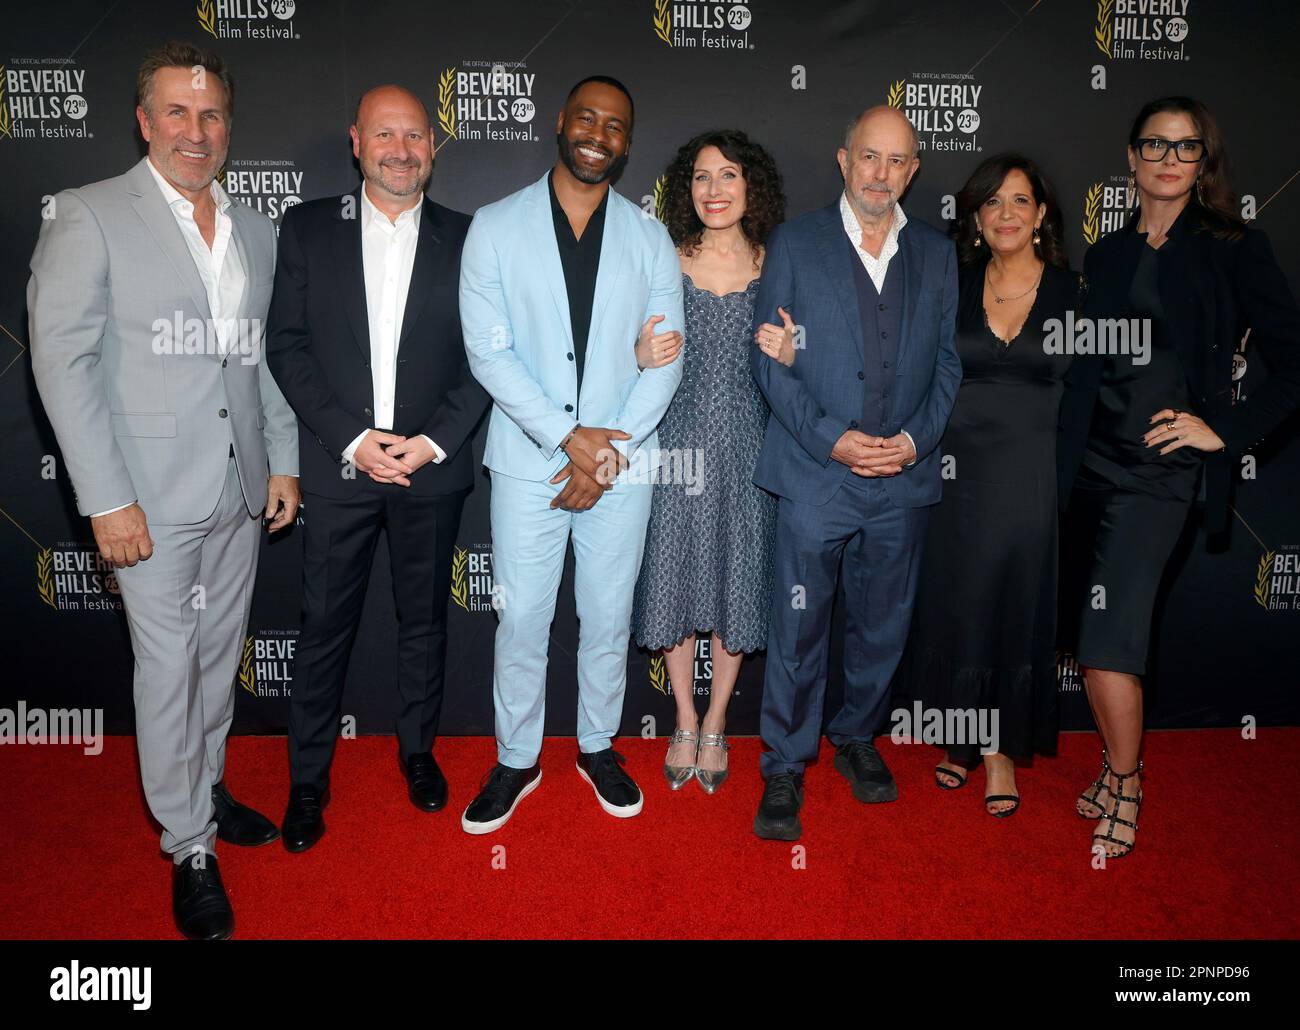 Hollywood, Ca. 19th Apr, 2023. David Kelsey, Steven Paul, Justin Marcel McManus, Lisa Edelstein, Richard Schiff, Sue Zarco Kramer, Bridget Moynahan at the opening night of the 23rd International Beverly Hills Film Festival at TCL Chinese 6 Theatres in Hollywood California on April 18, 2023. Credit: Faye Sadou/Media Punch/Alamy Live News Stock Photo